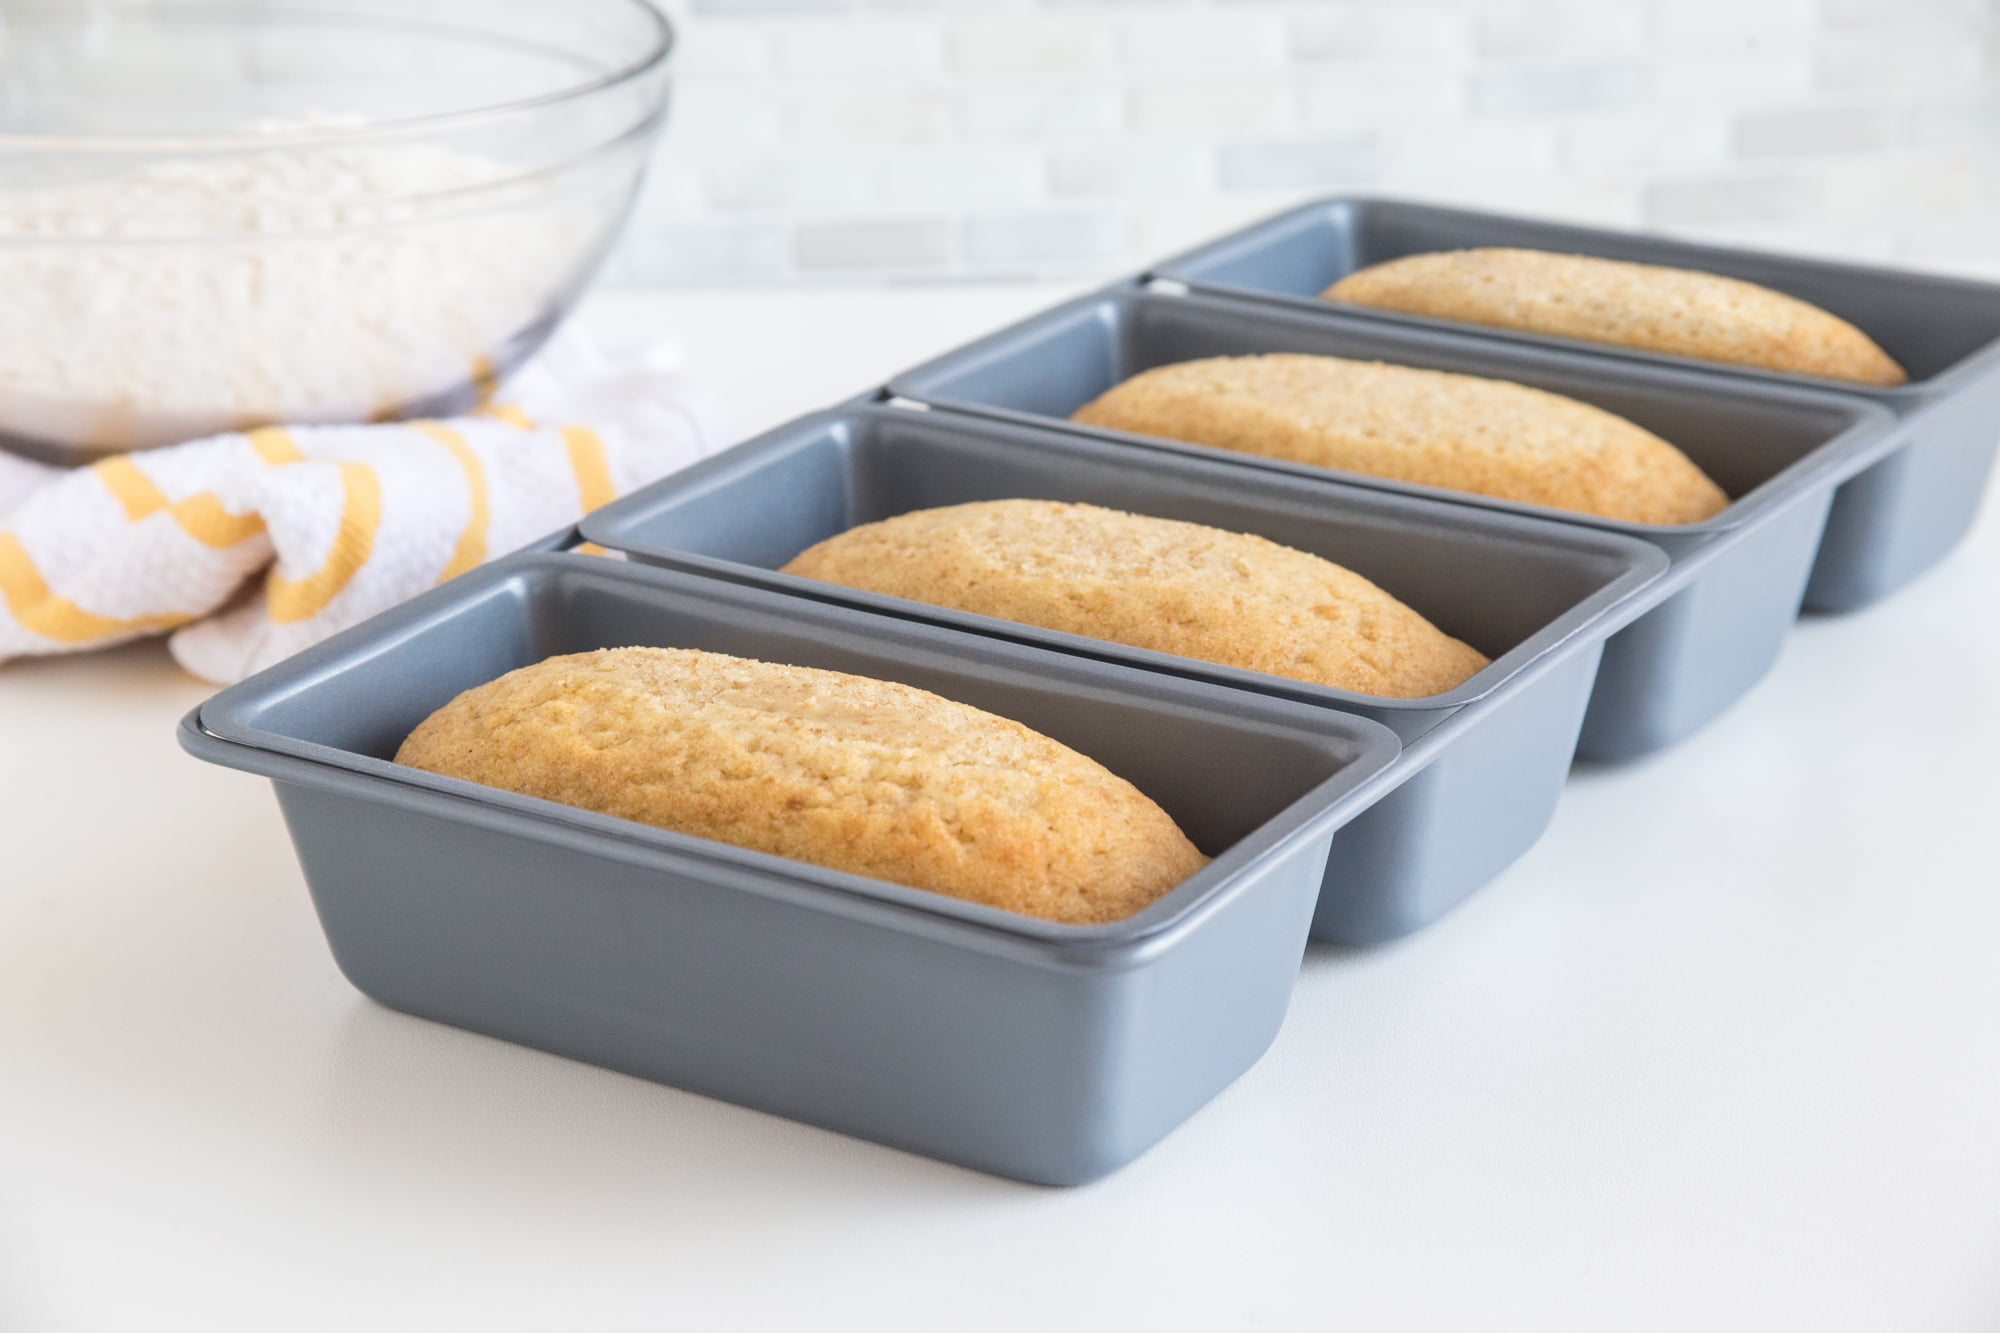 Fox Run Linked Non-Stick Carbon Steel Mini Bread Loaf Pans, Set of 4 